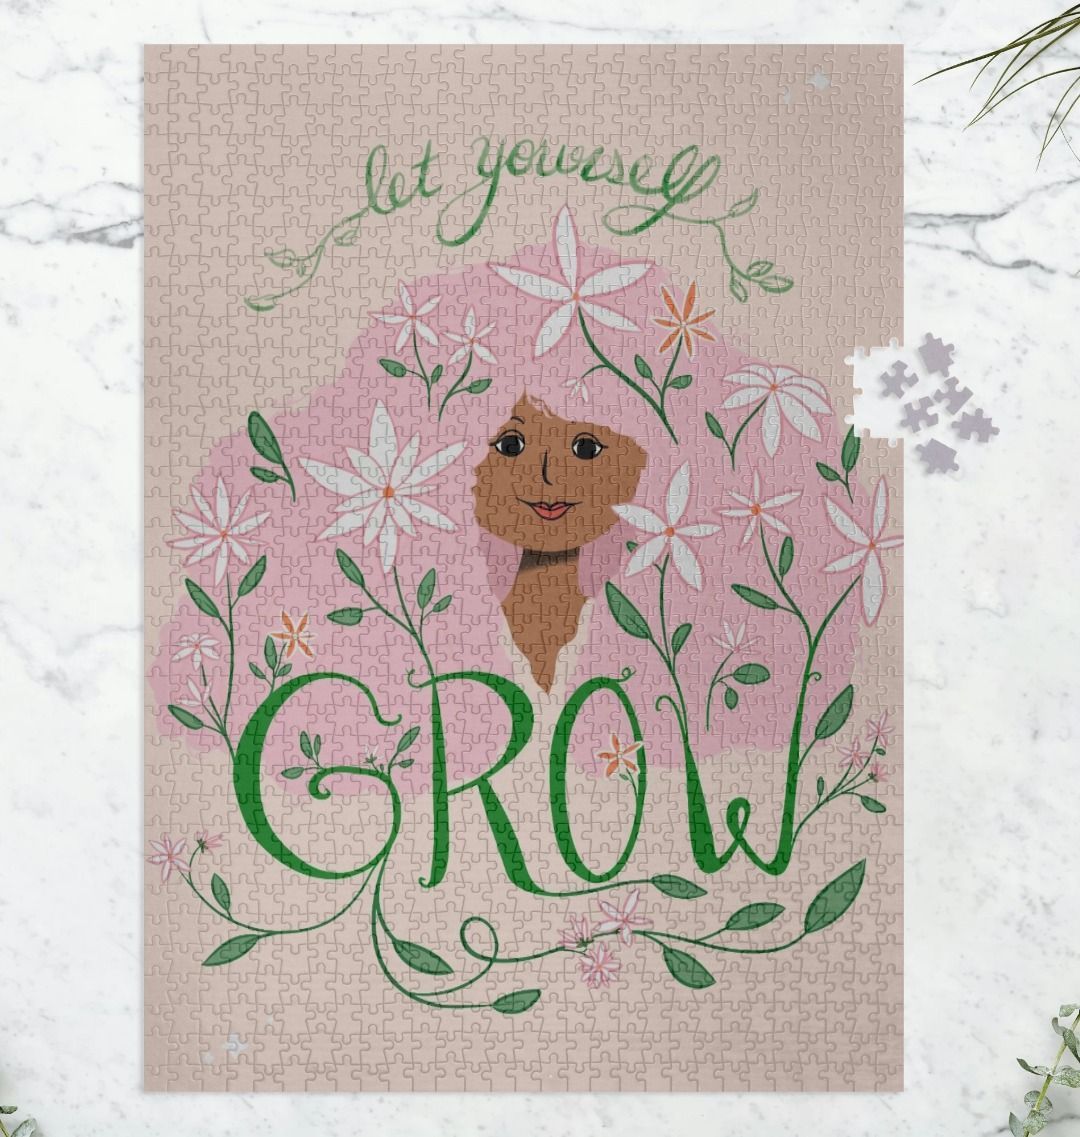 Let Yourself Grow 100% Recycled Vertical Puzzle